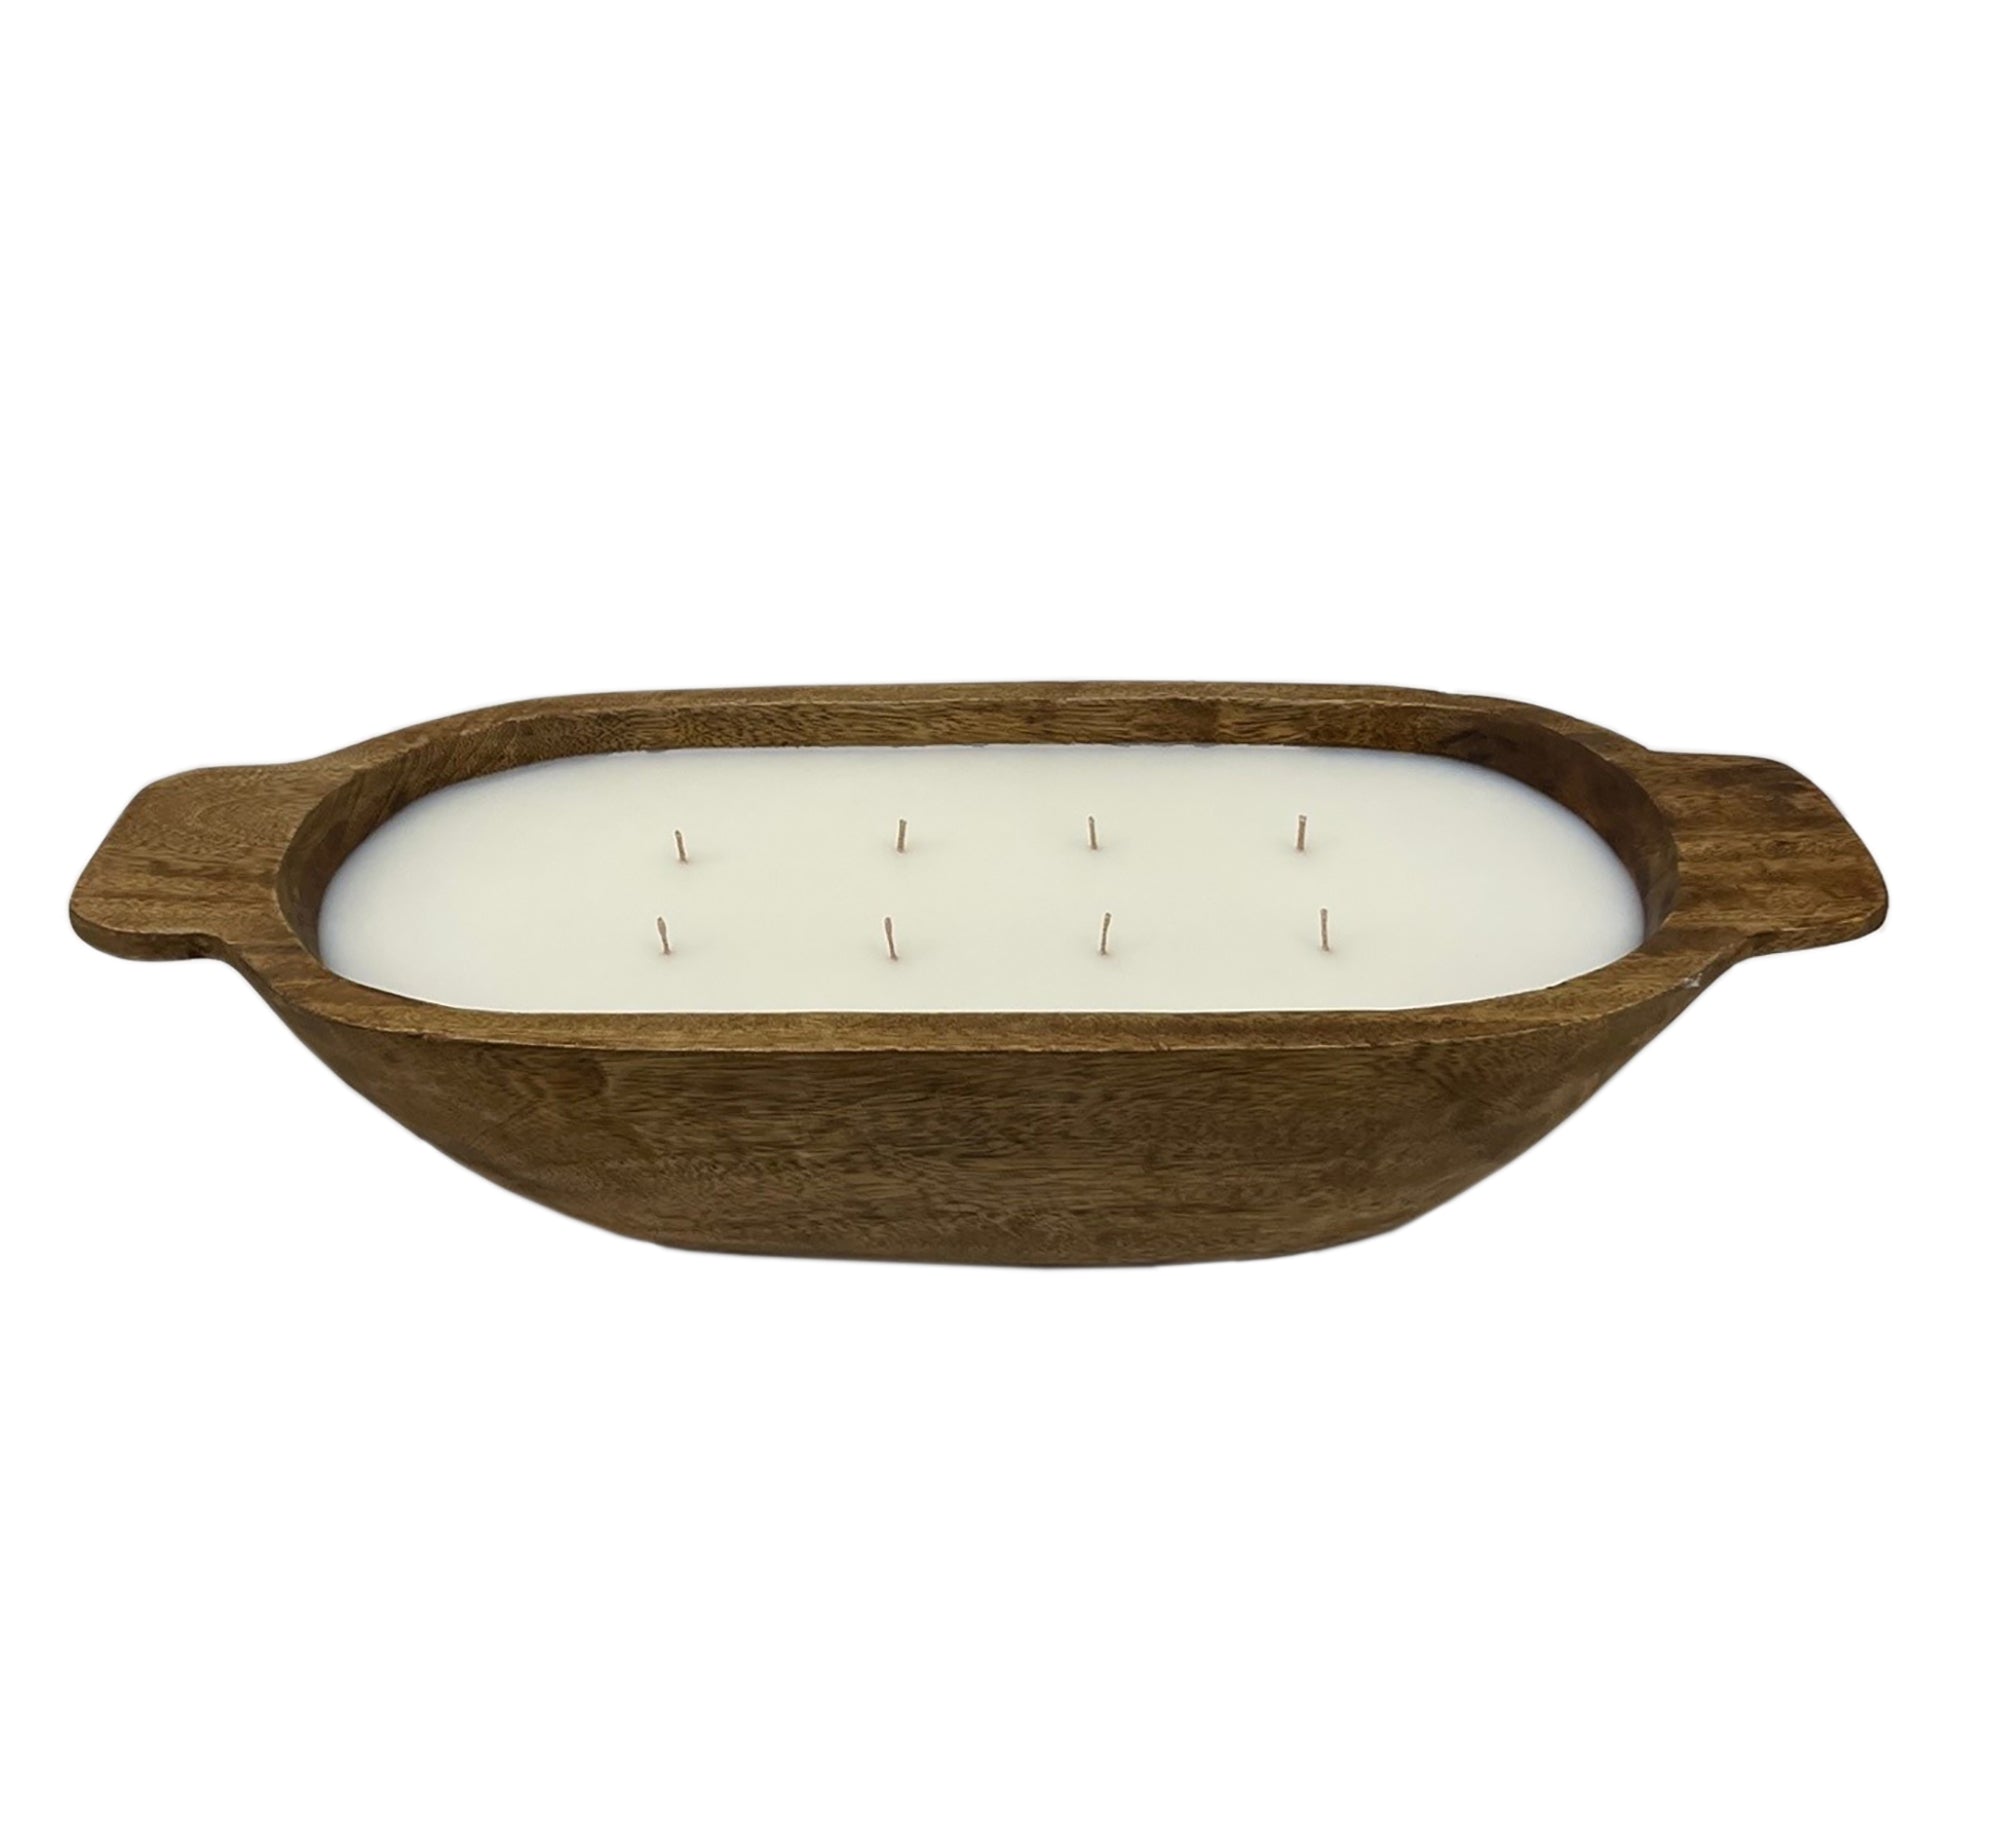 Mango Wood Large Oval Candle with Handles